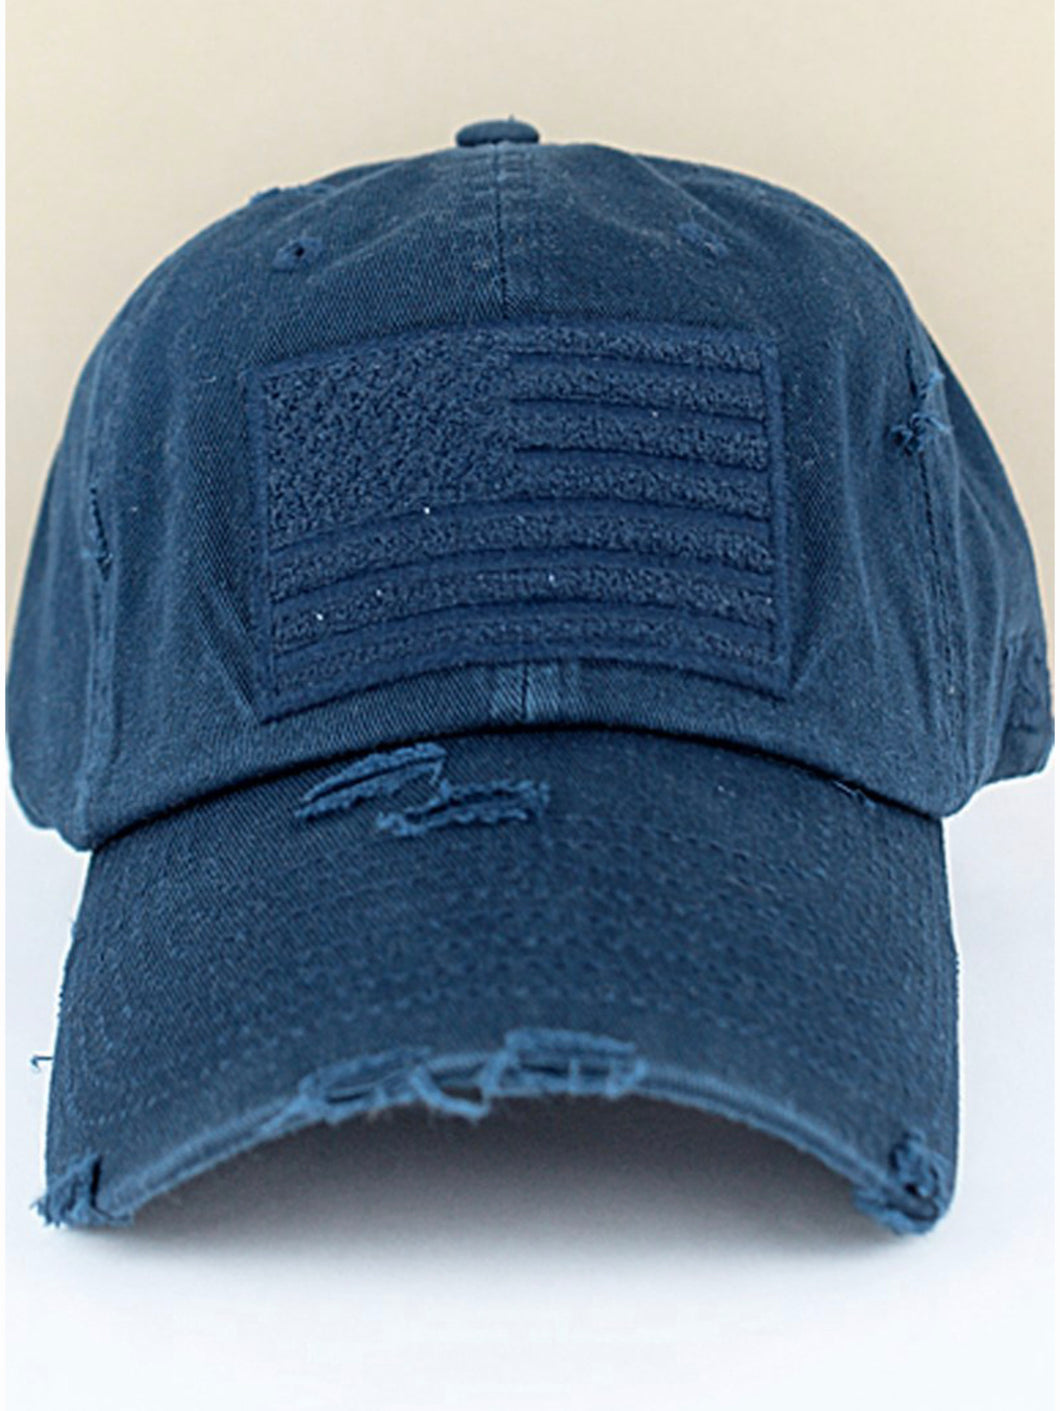 Distressed Navy Subdued Flag Tactical Operator Cap